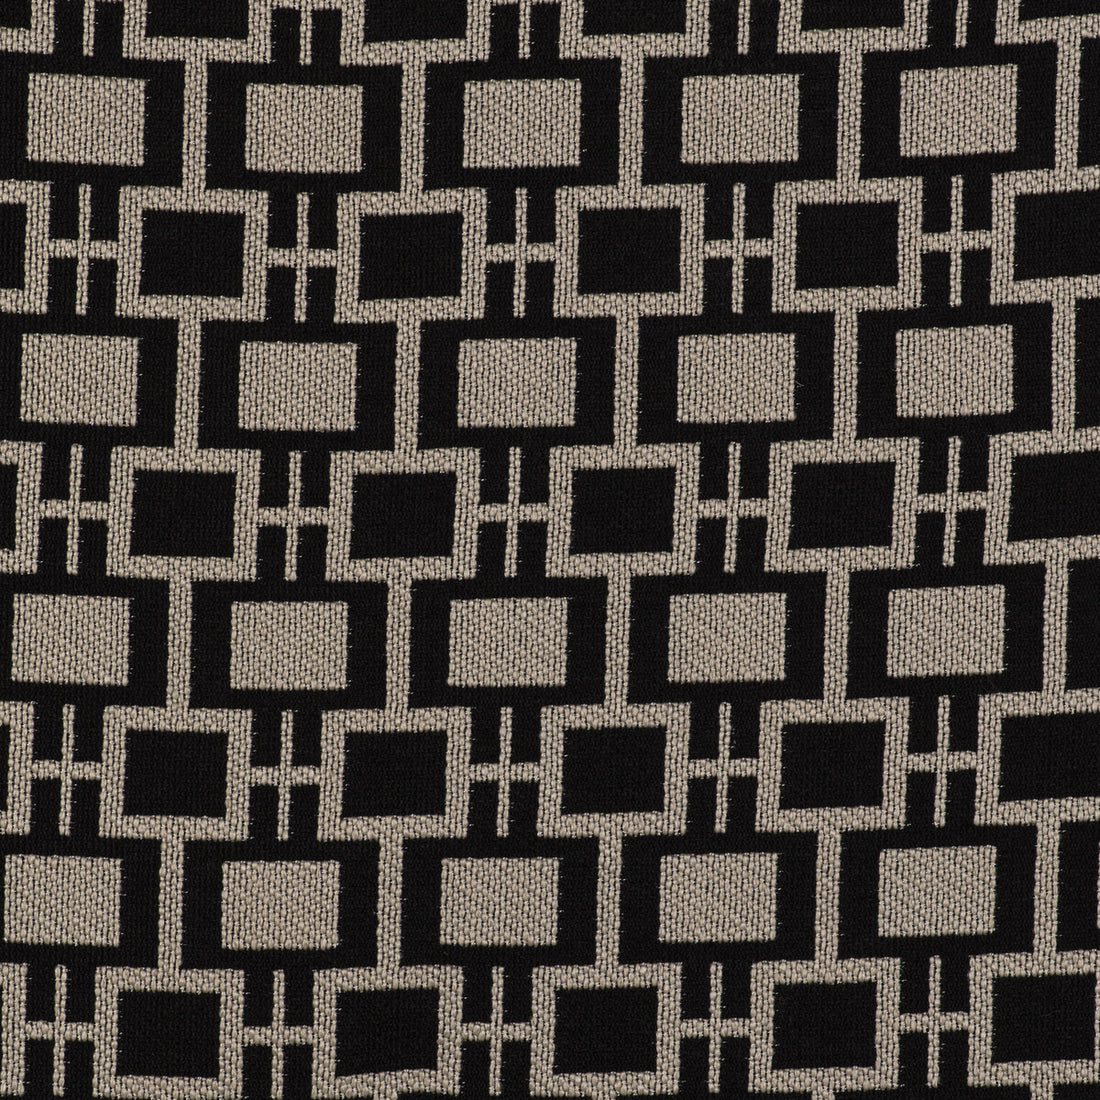 Series fabric in lino/negro color - pattern GDT5516.002.0 - by Gaston y Daniela in the Gaston Libreria collection